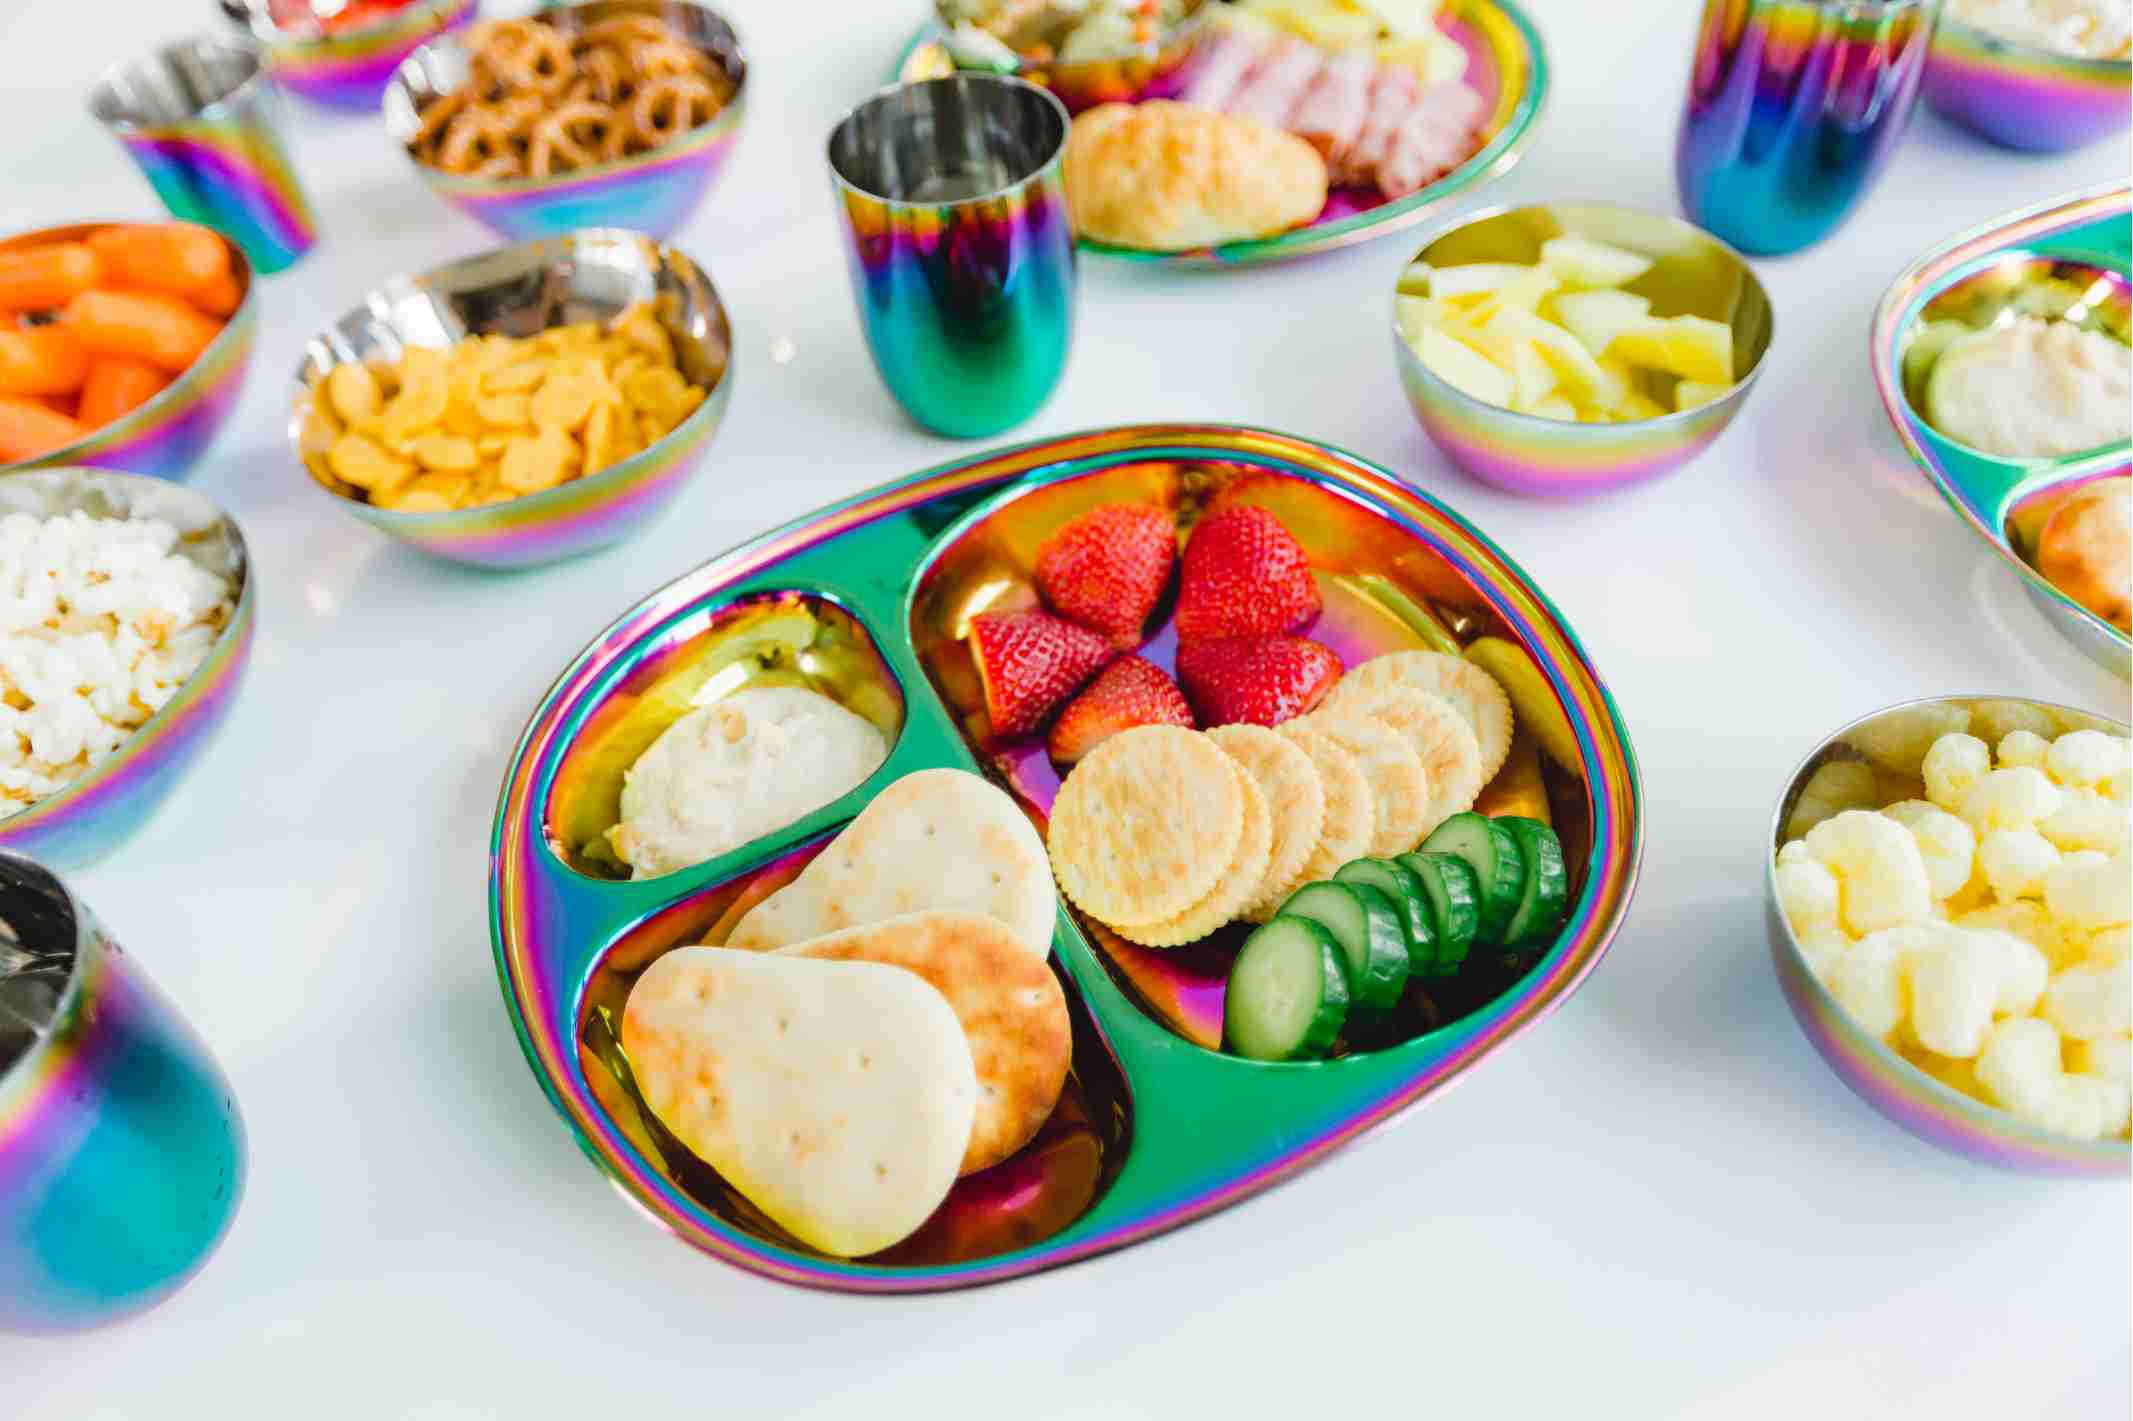 Recipes for Rainbow Plates | Meal Served on Rainbow Plate